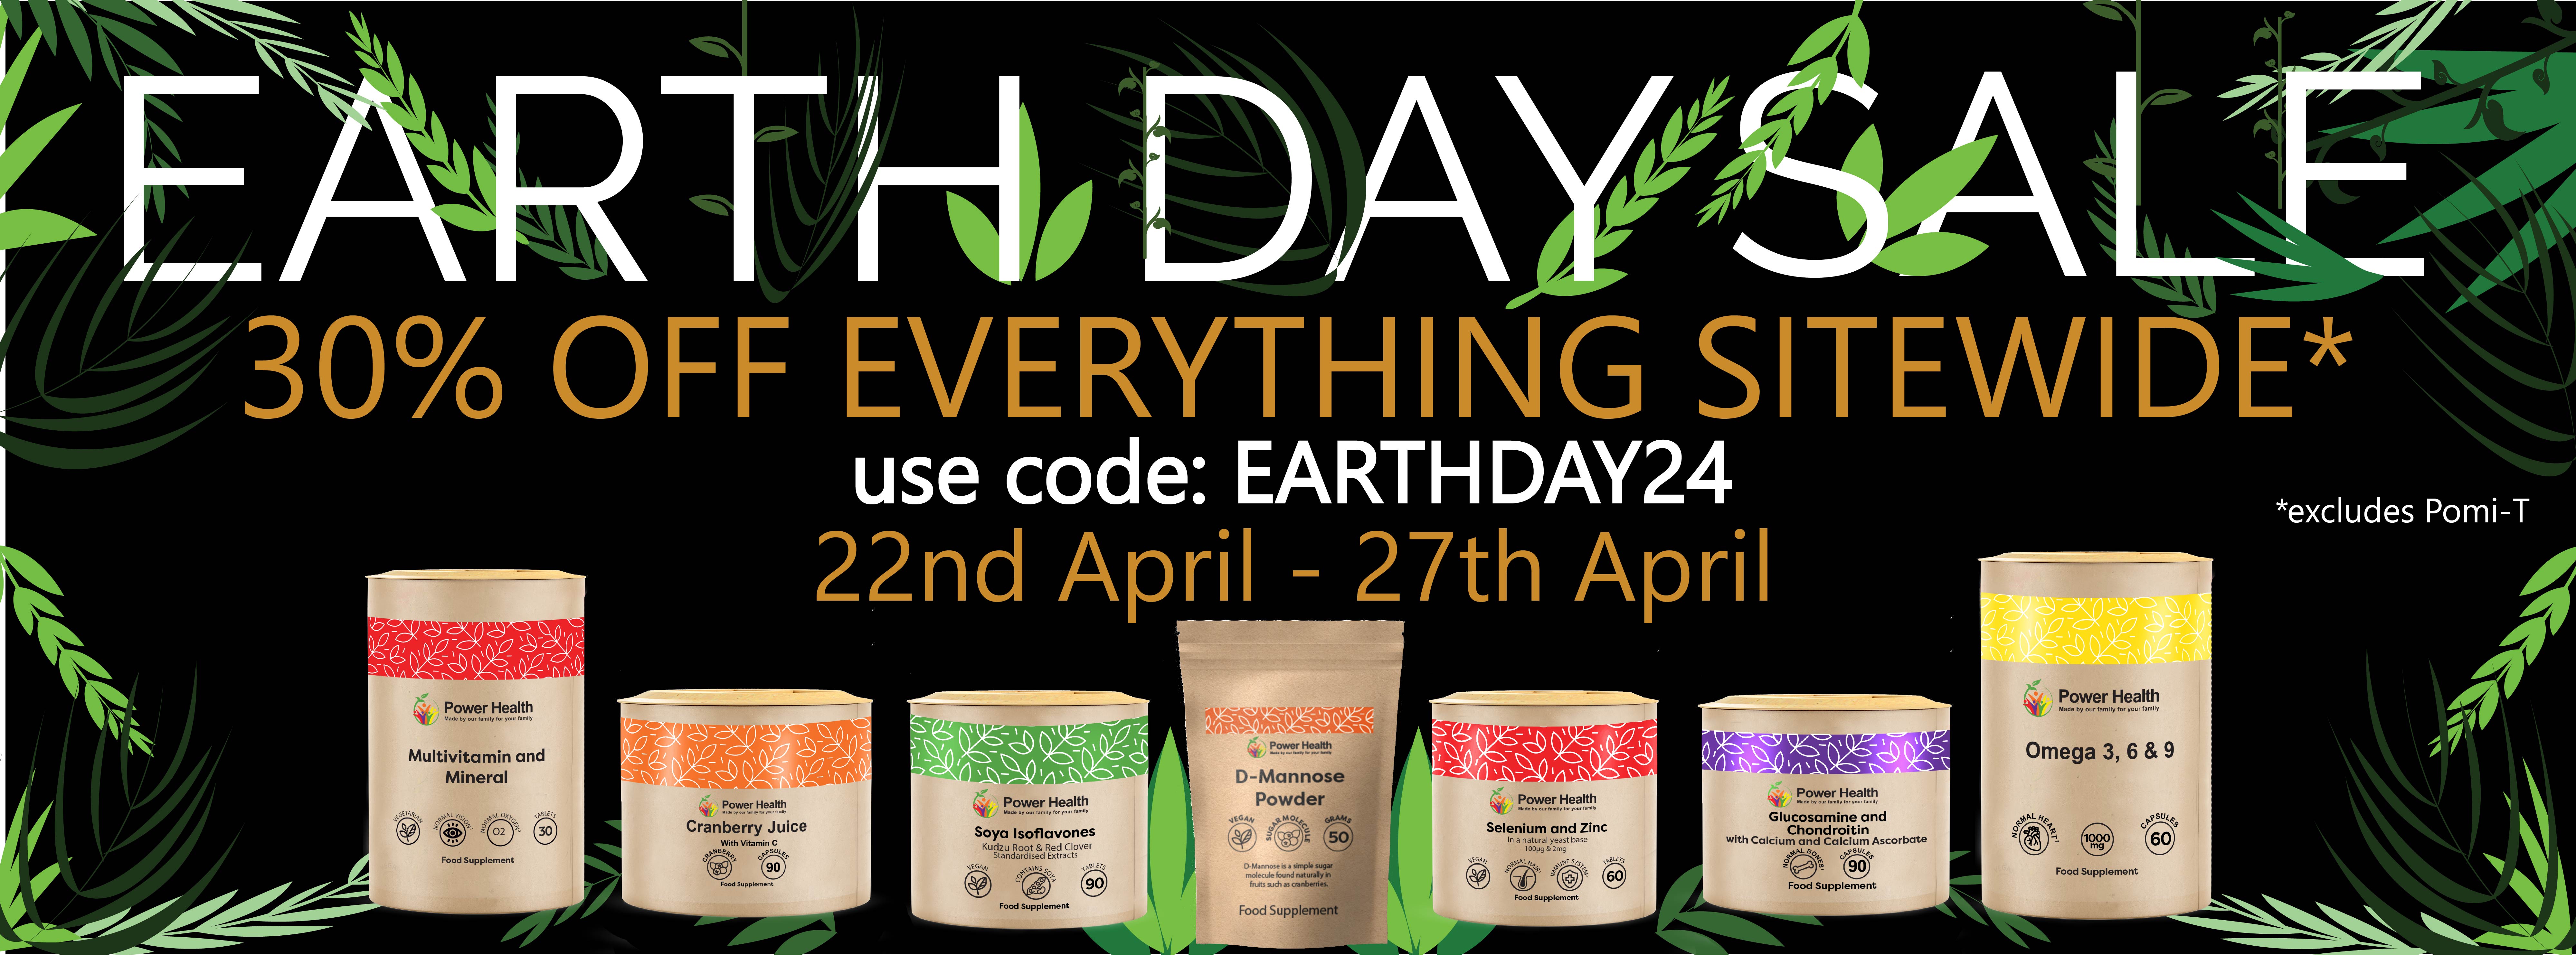 Earth Day Sale